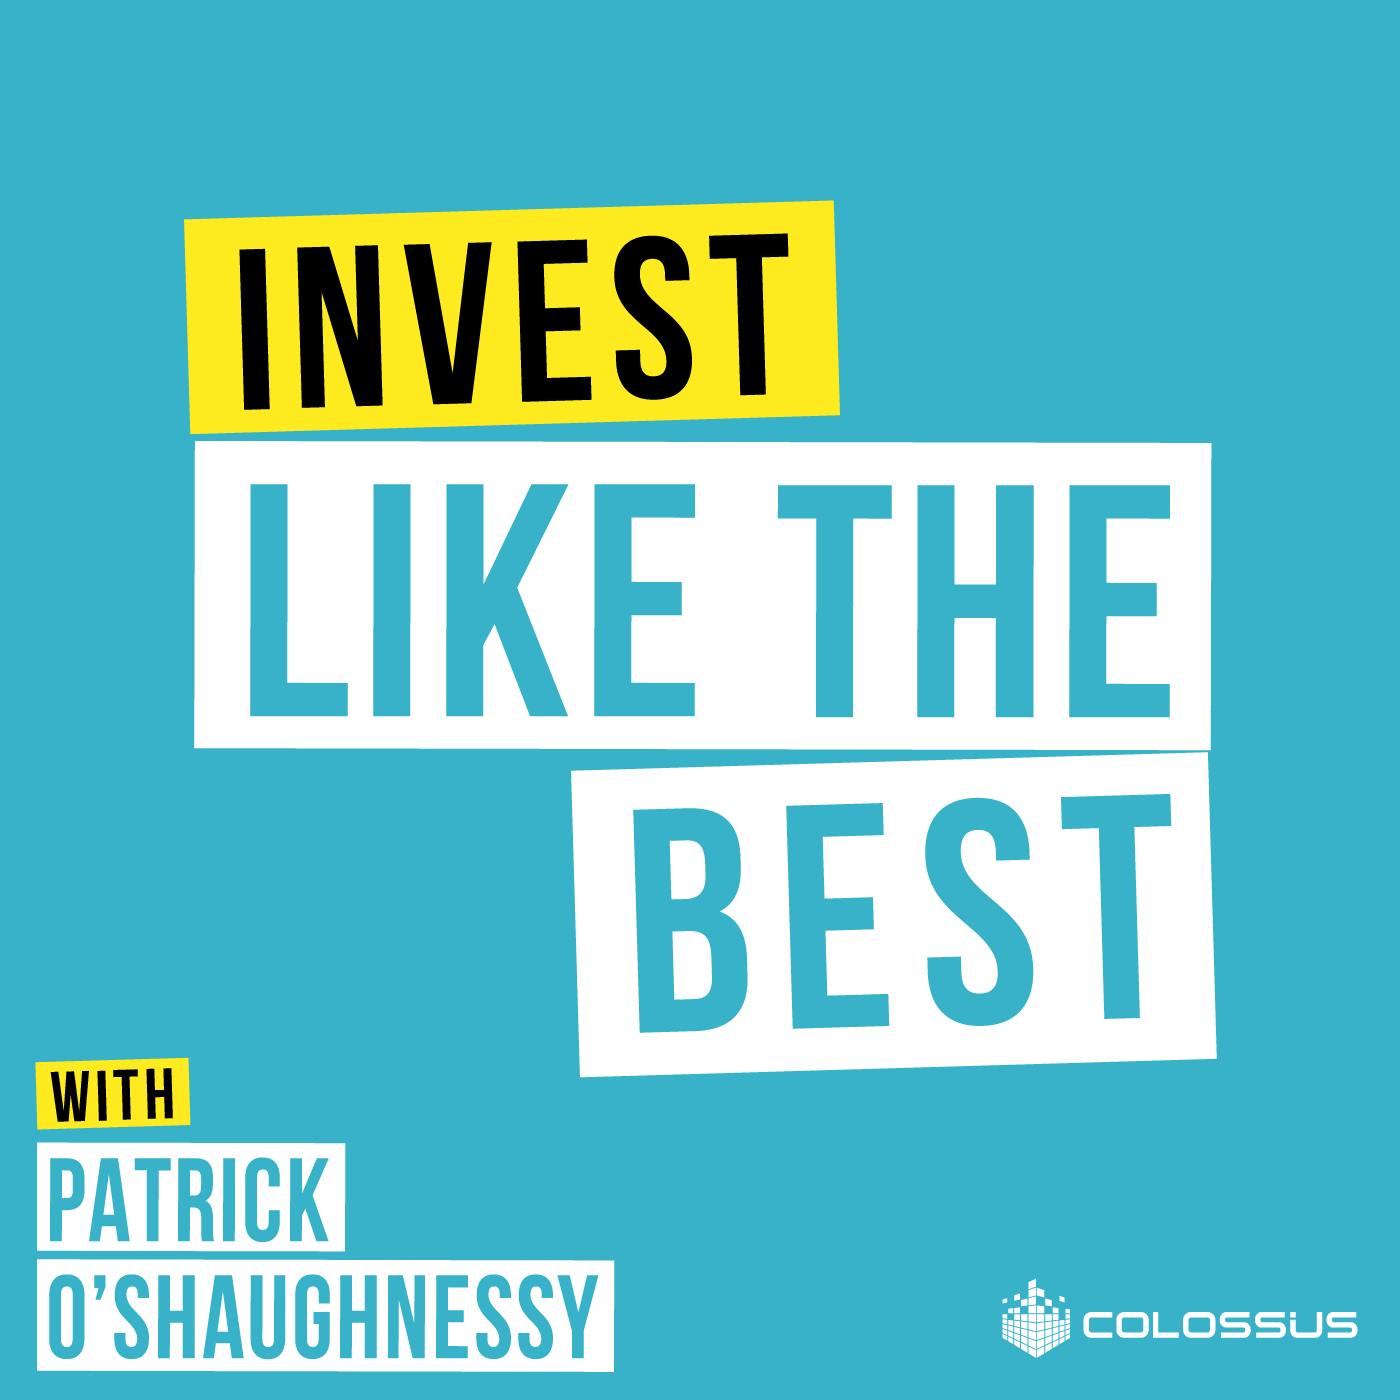 Humble Giants – Vanguard’s Gerry O’Reilly and Jim Rowley – [Invest Like the Best, EP.06]